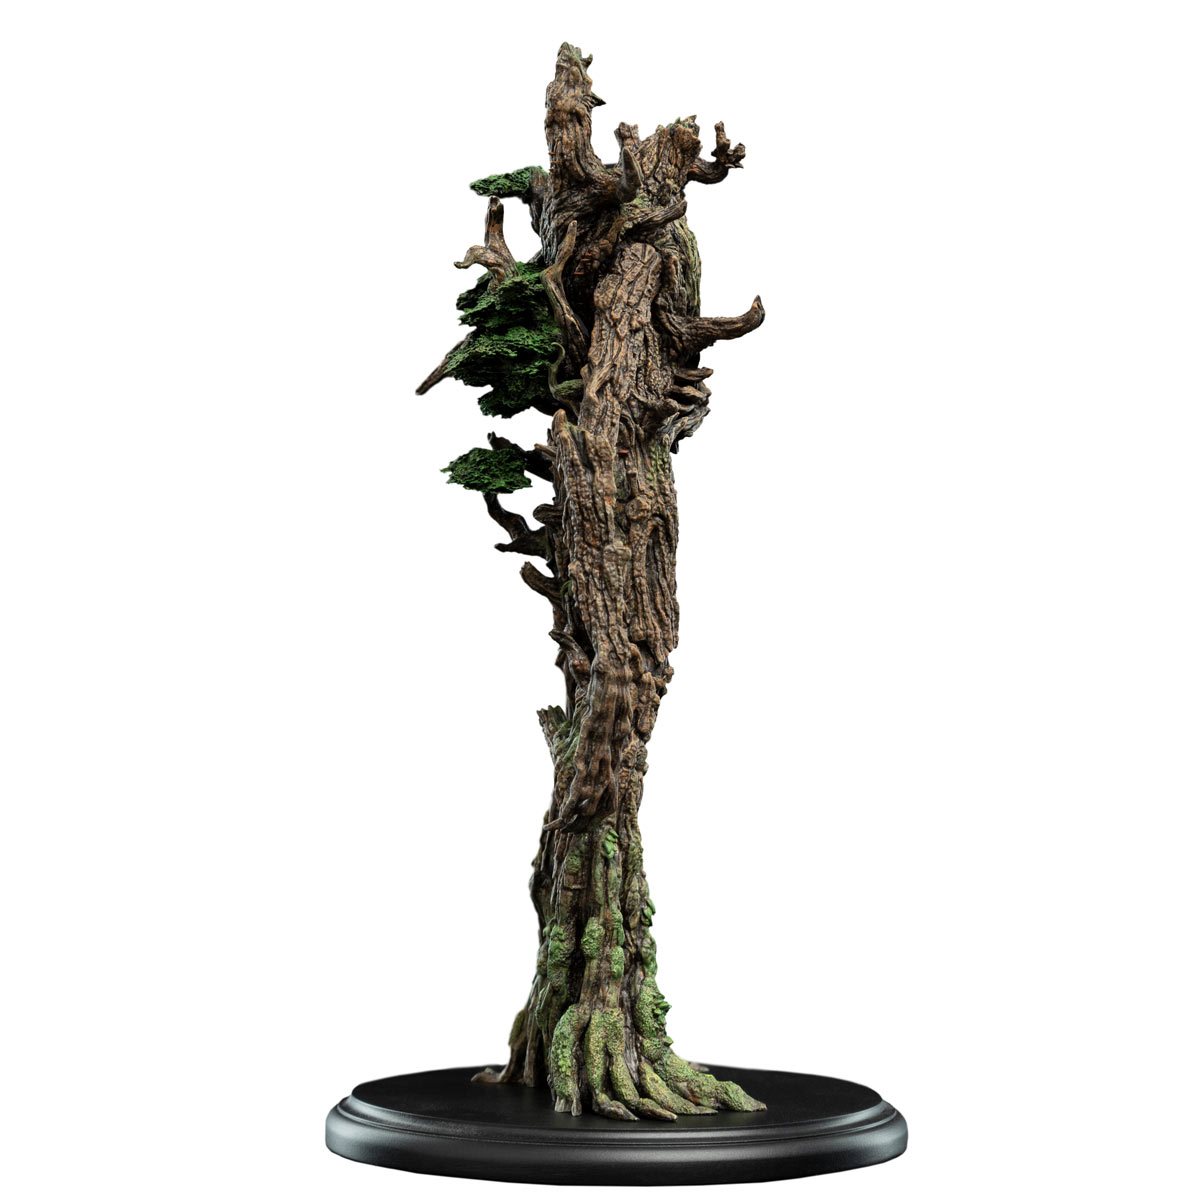 FOIL The Party Tree (The Great Henge) from Commander: The Lord of the Rings:  Tales of Middle-earth Proxy